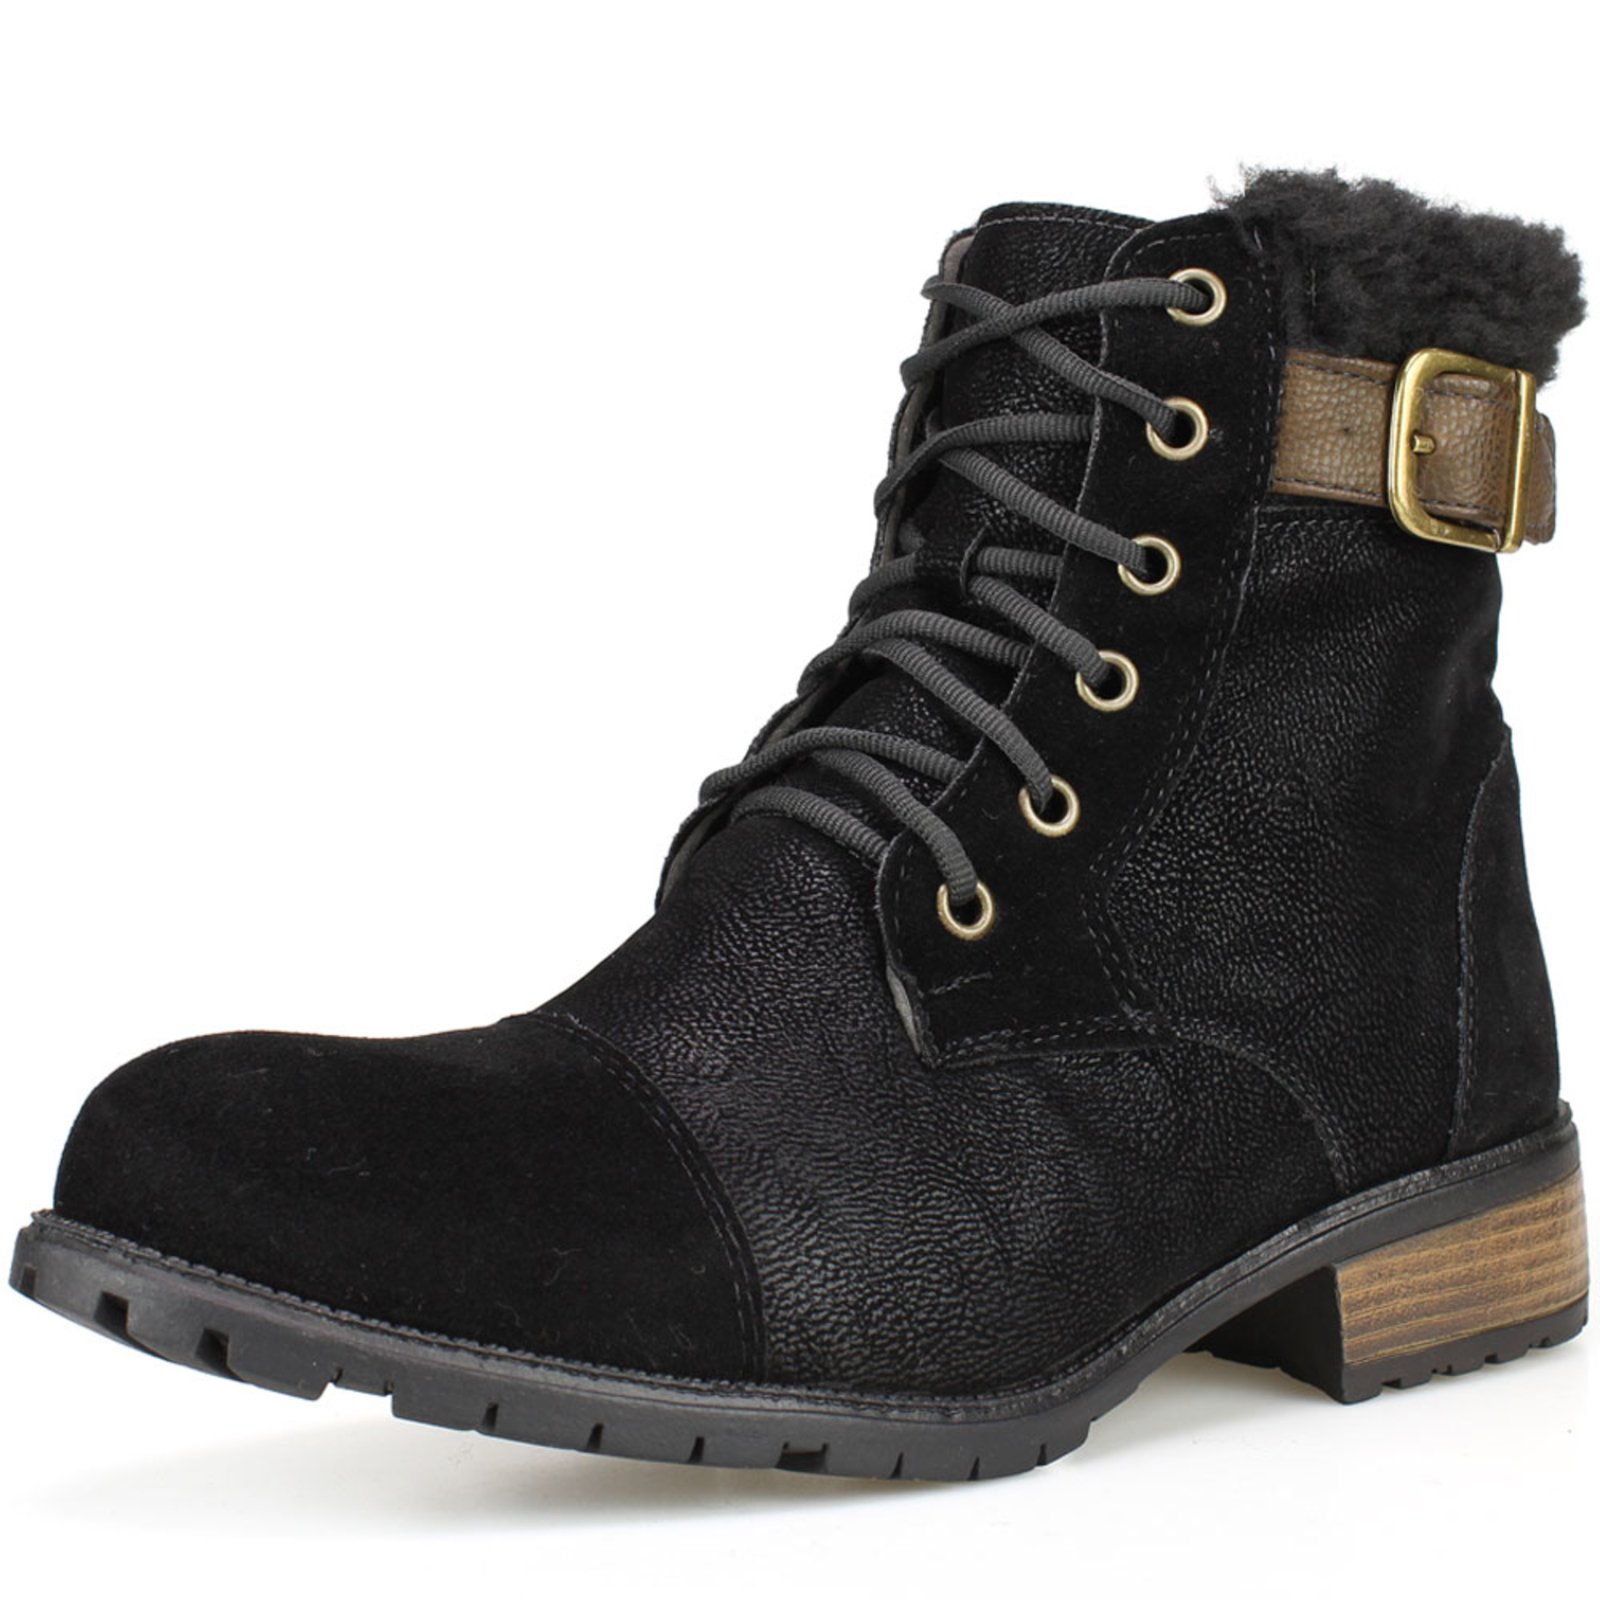 ankle boot confortavel